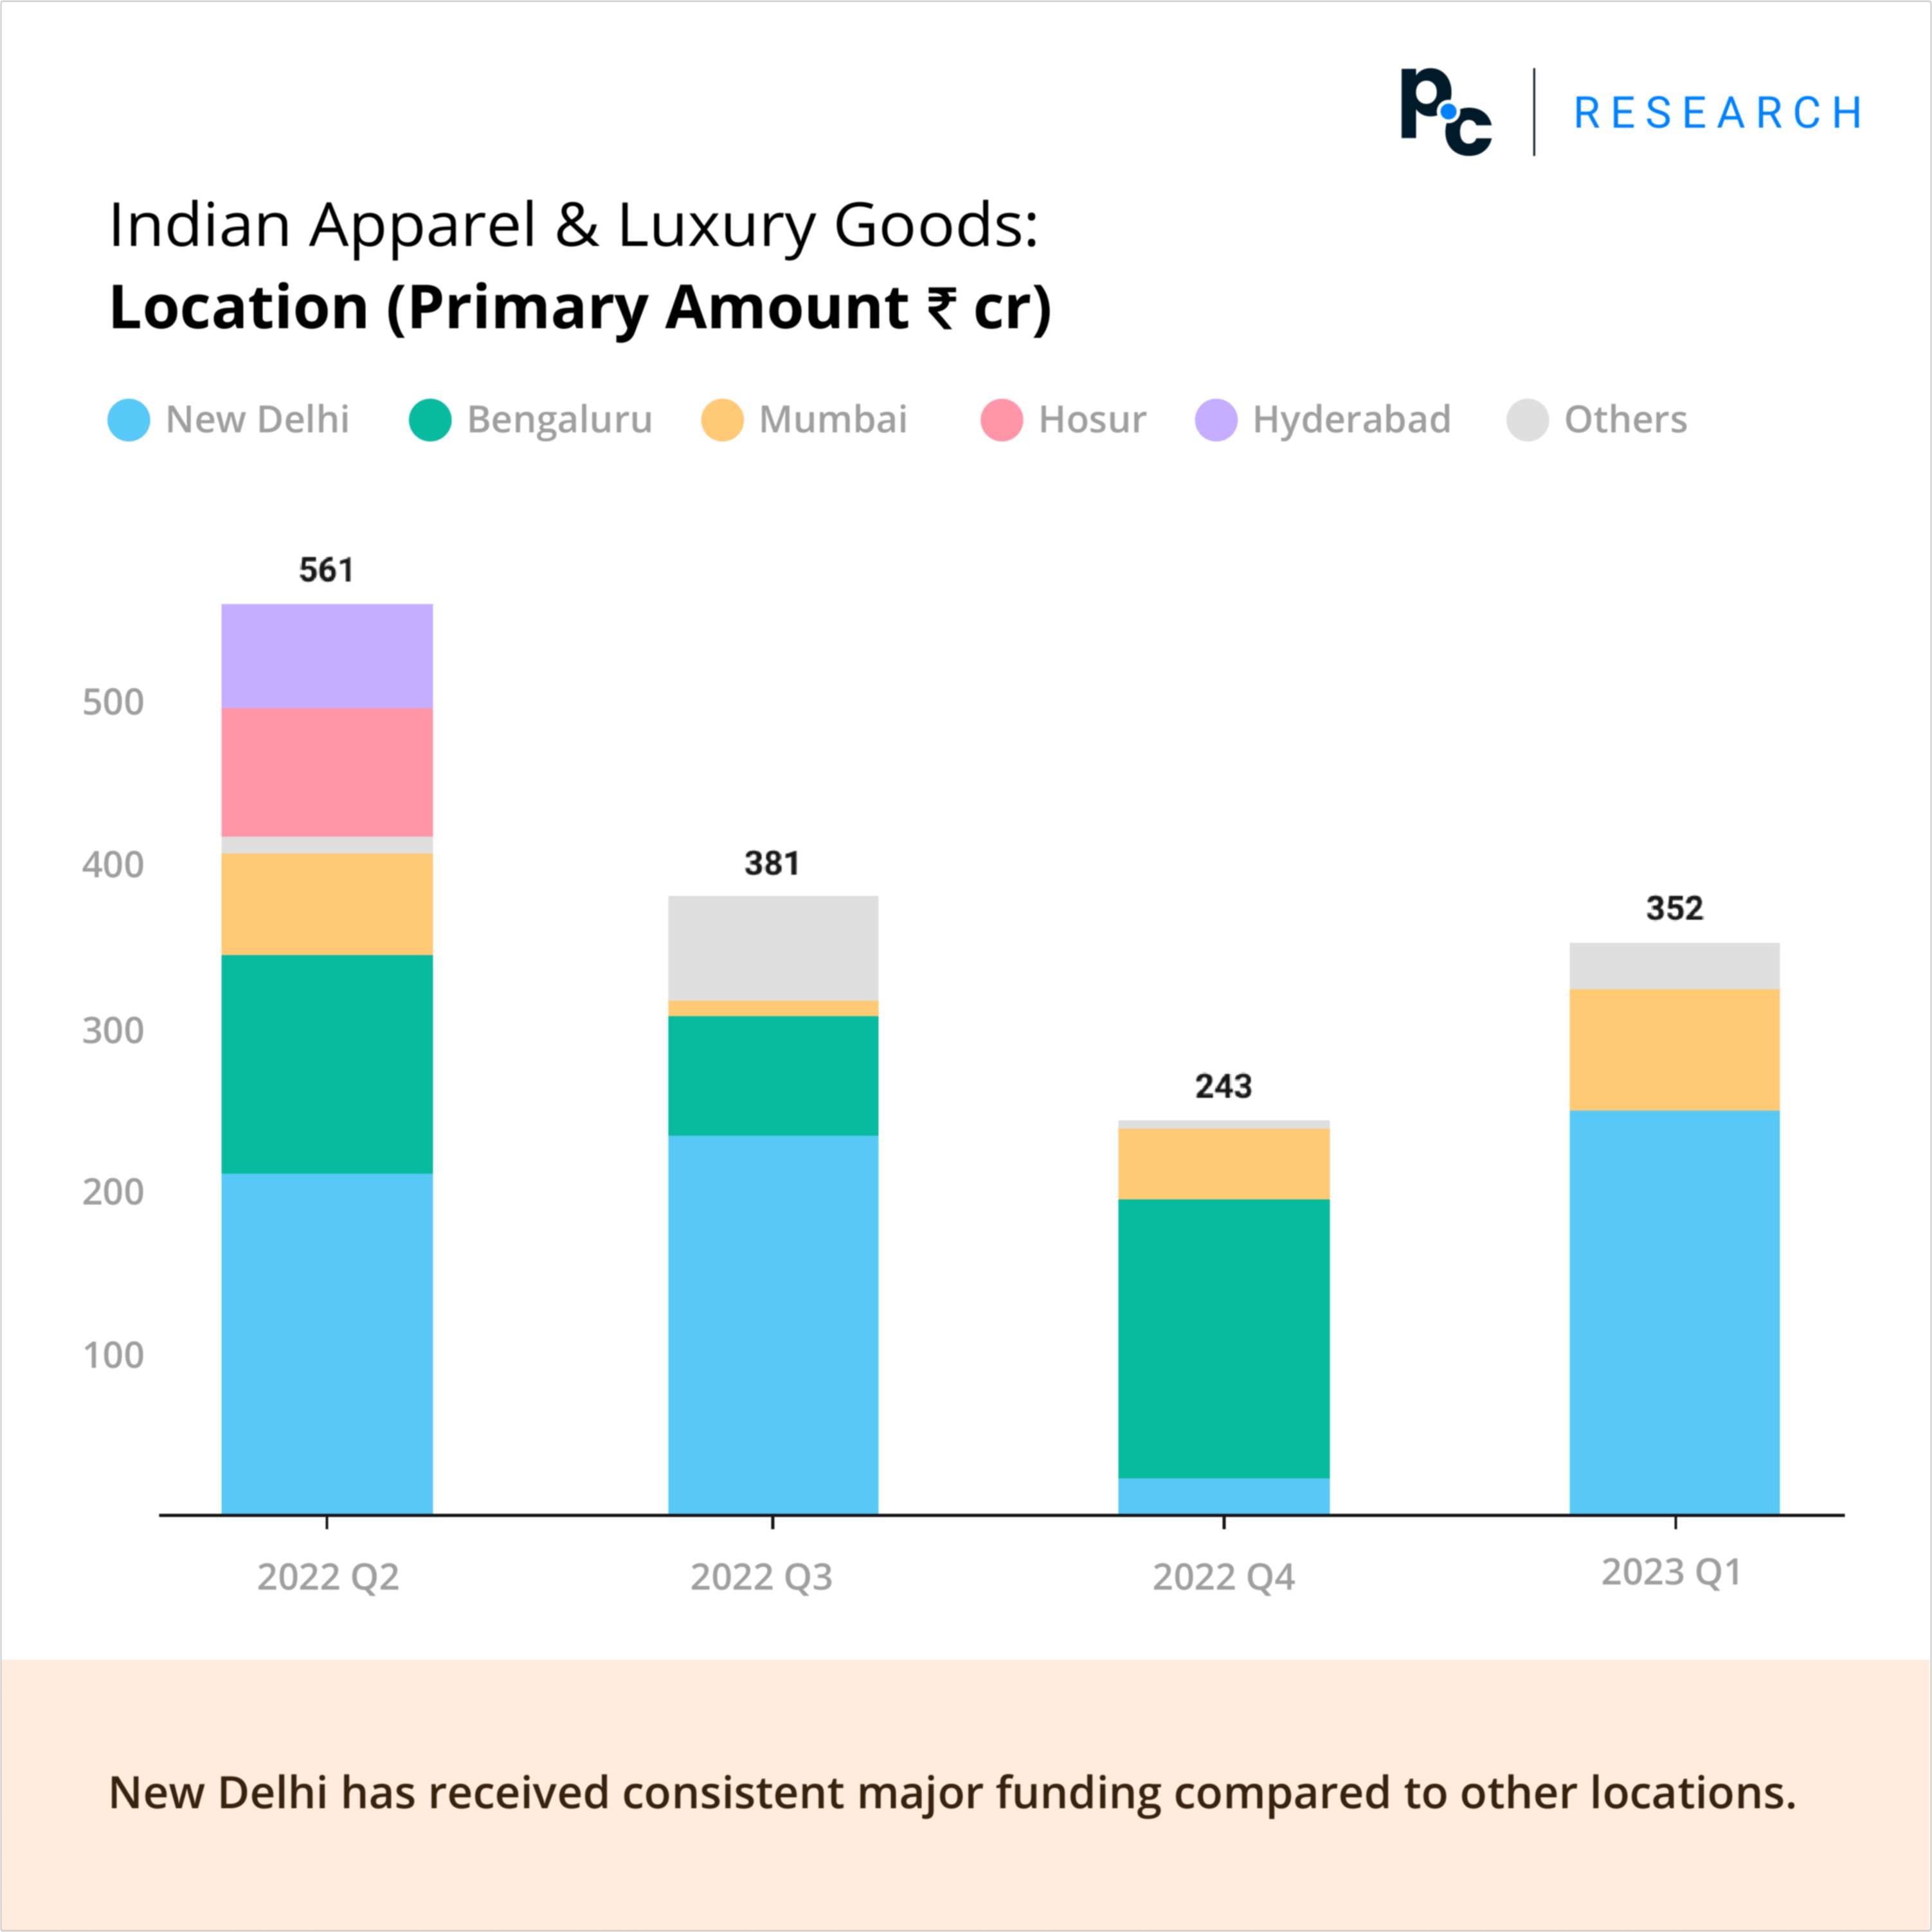 Indian Apparel & Luxury Goods: Location (Primary Amount ₹ cr).

New Delhi has received consistent major funding compared to other locations.